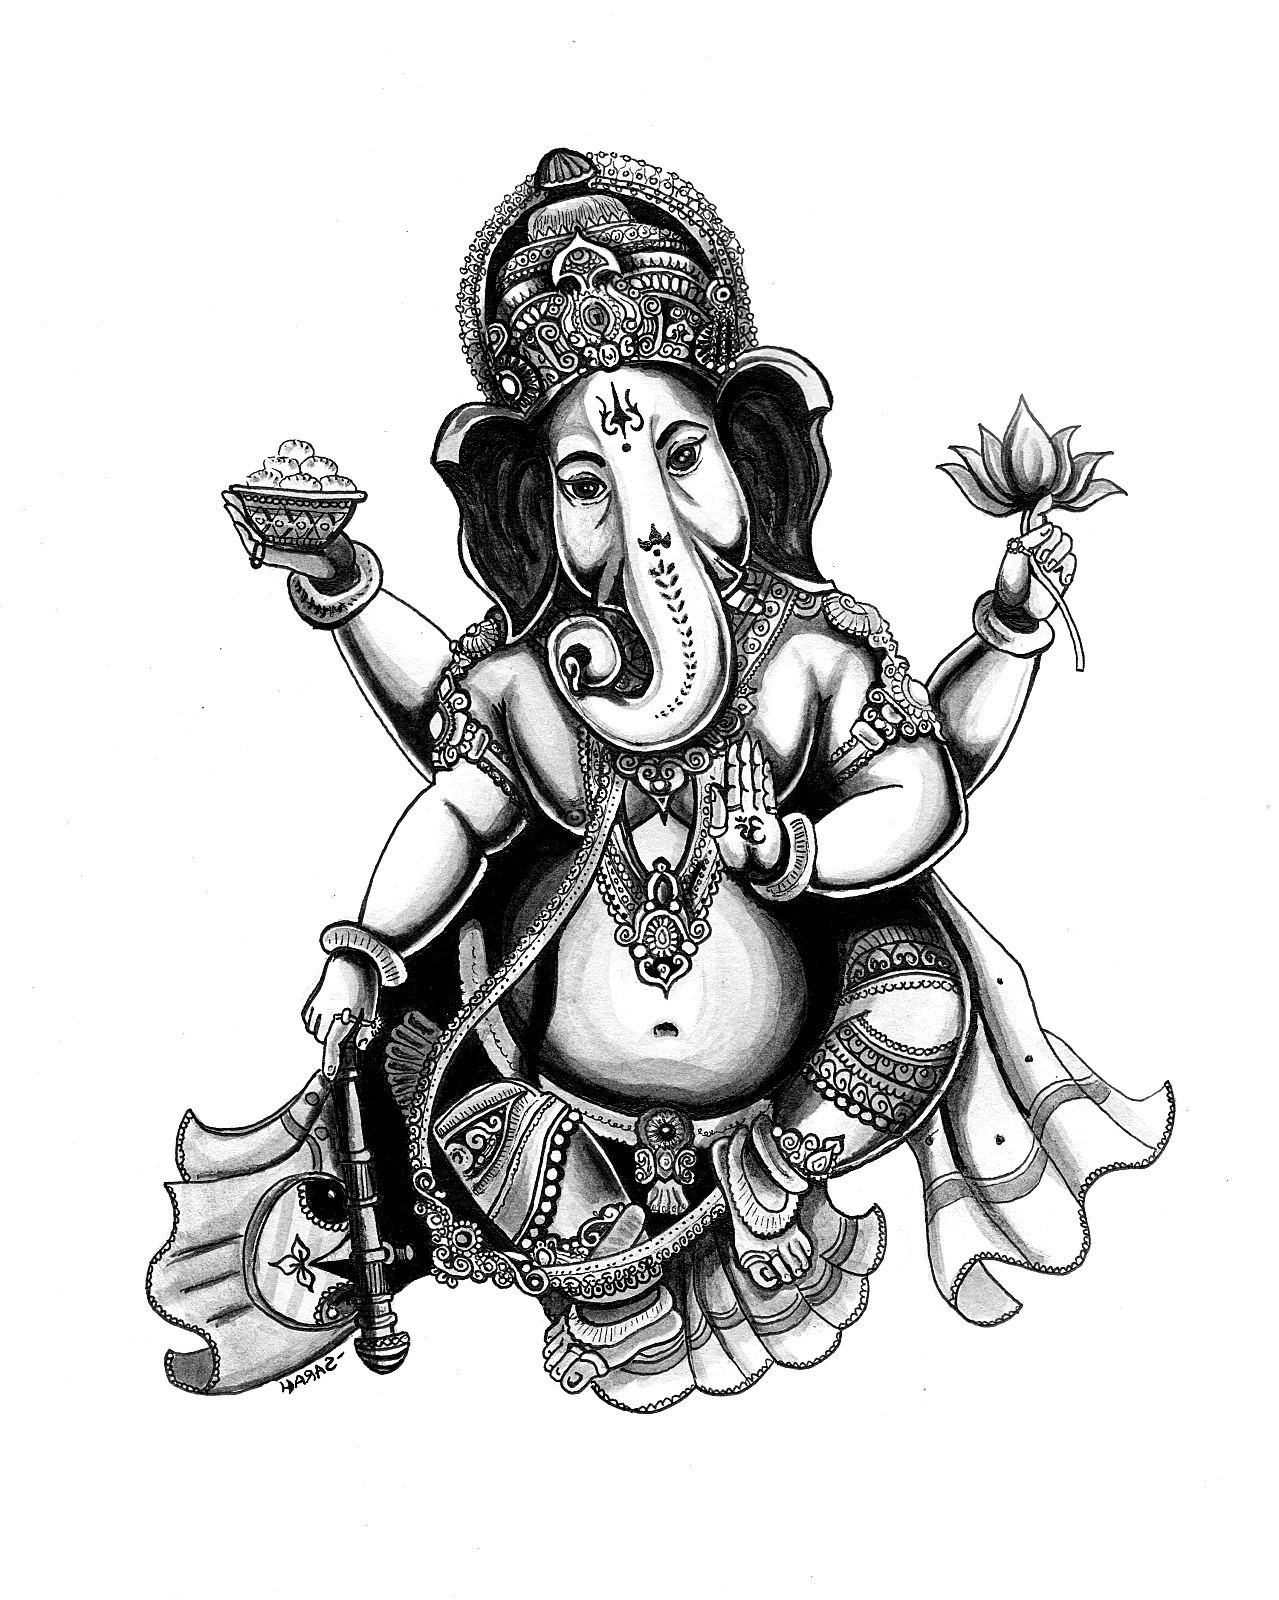 Ganesh and his elephant's head - India Adult Coloring Pages